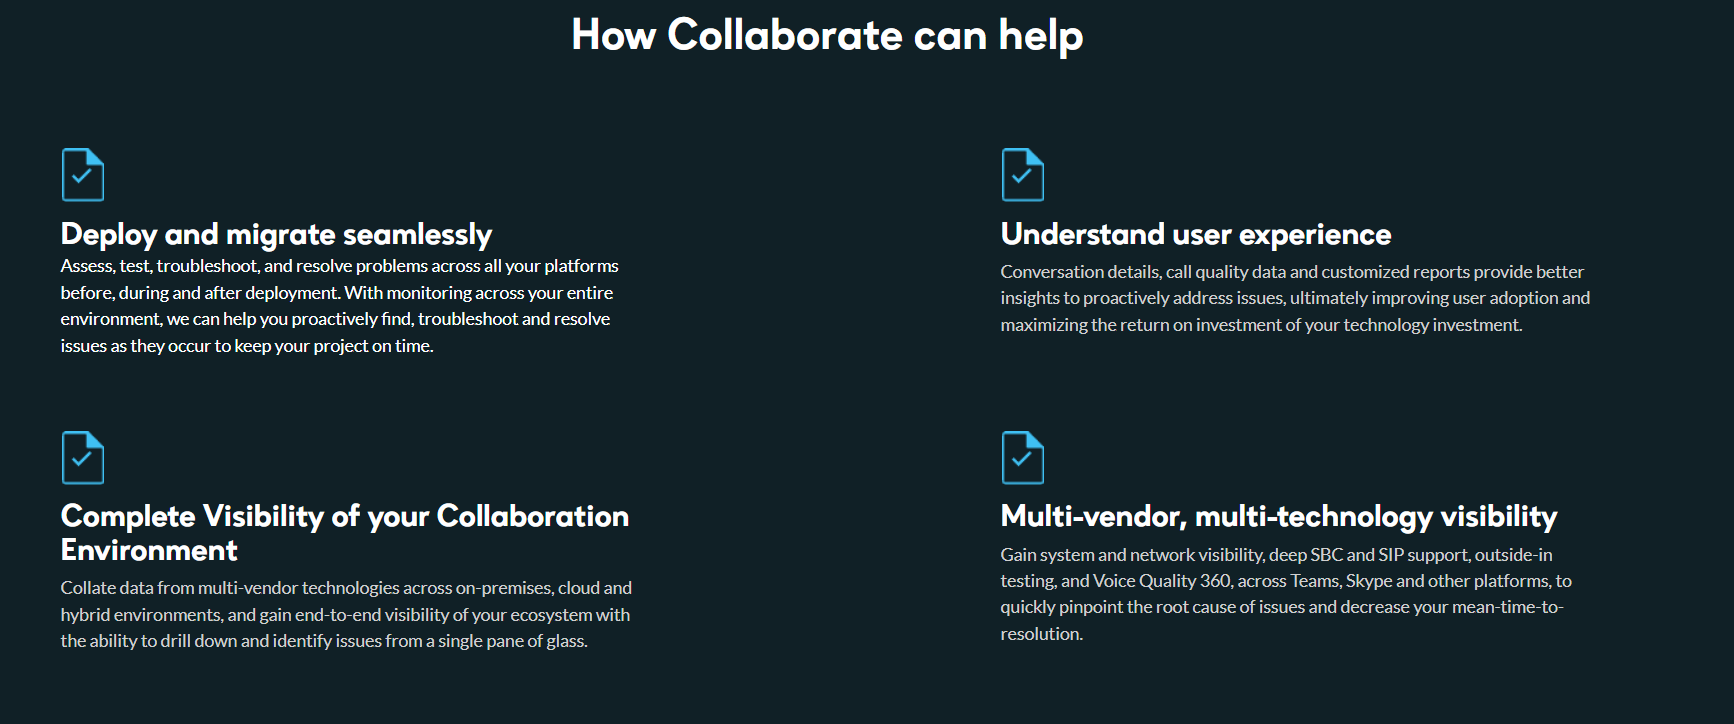 How Collaborate can help